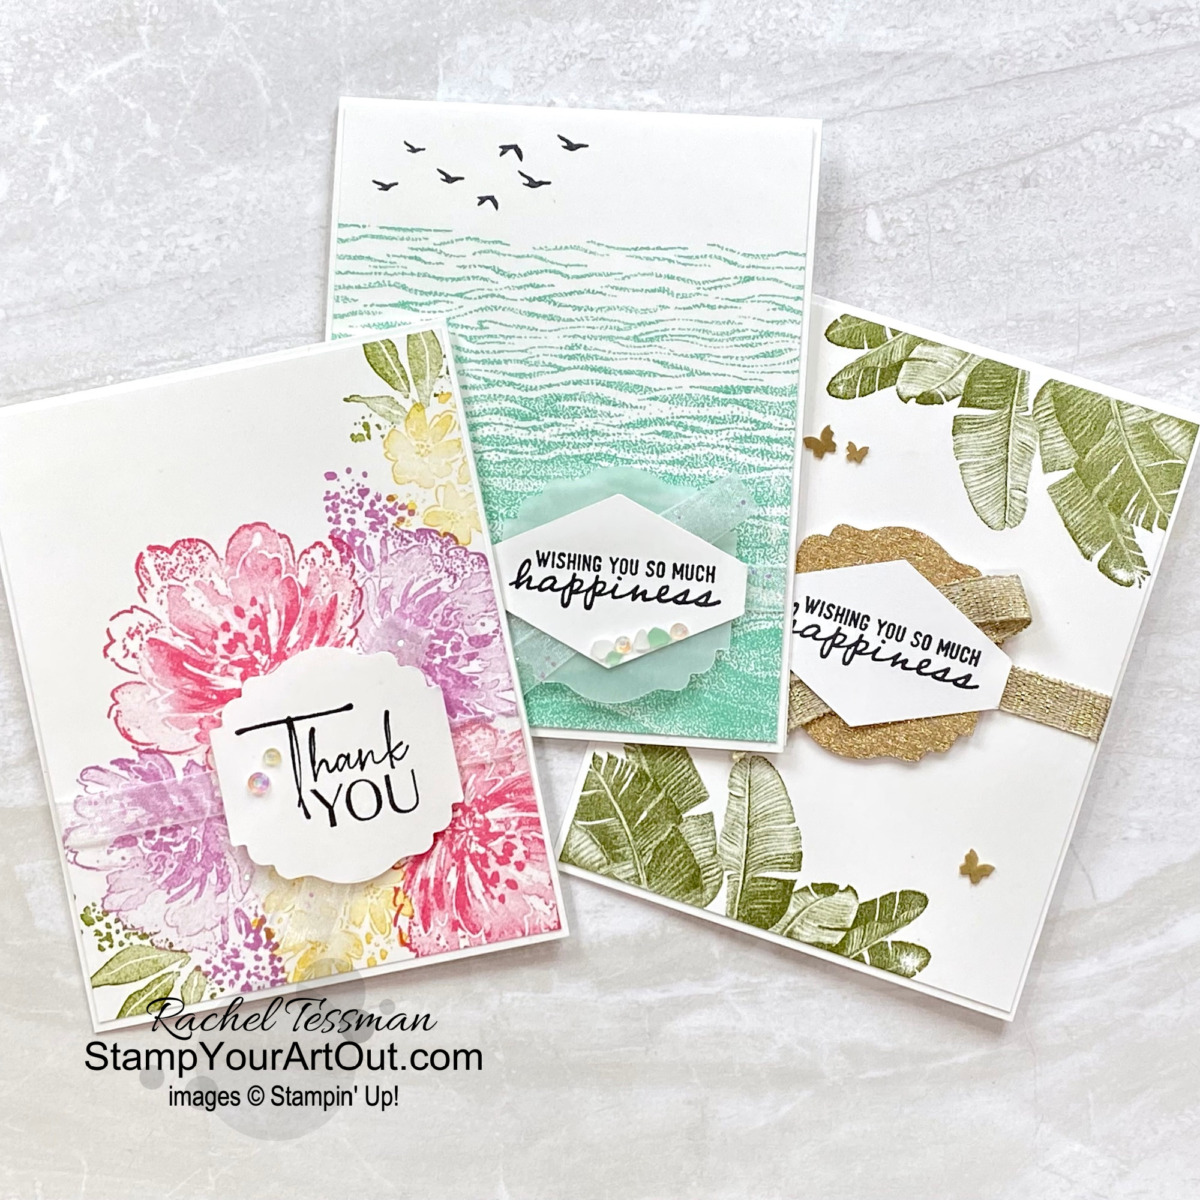 Click here to make these simple yet beautiful cards without a lot of effort or expensive tools. These cards all feature new 2022 products: the Flowing Flowers, Gentle Waves, On the Horizons, and Island Vibes stamp sets, and the Faux Sea Glass Shapes, Iridescent Rhinestones, Brushed Brass Butterflies embellishments. Access measurements, more photos, a how-to video with directions, and links to the products I used. - Stampin’ Up!® - Stamp Your Art Out! www.stampyourartout.com